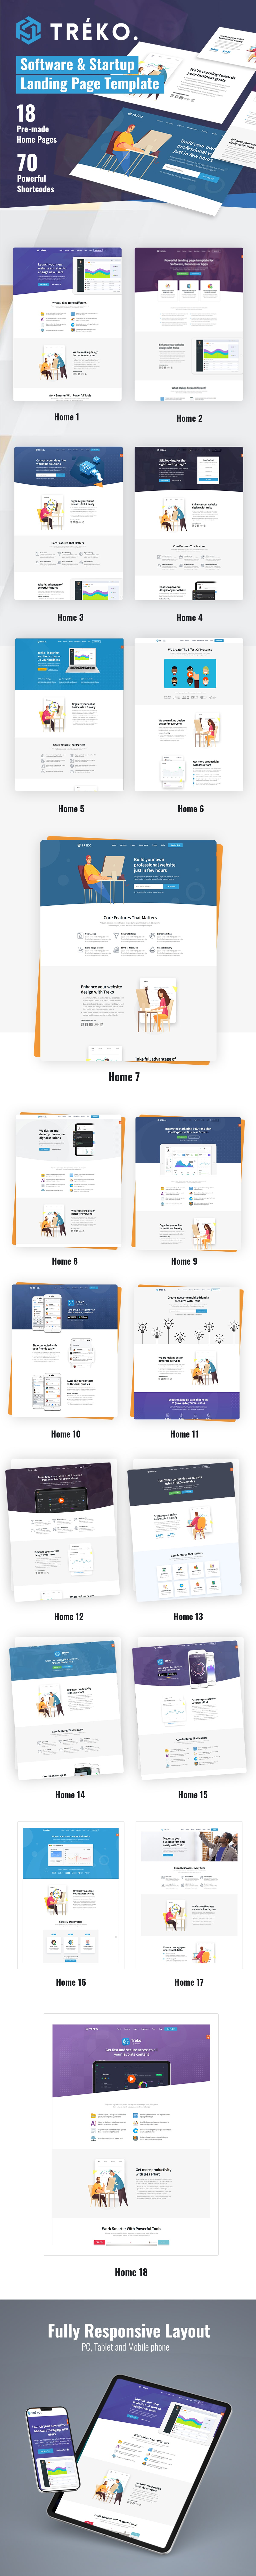 Treko - Startup and Software Landing Page template - 1